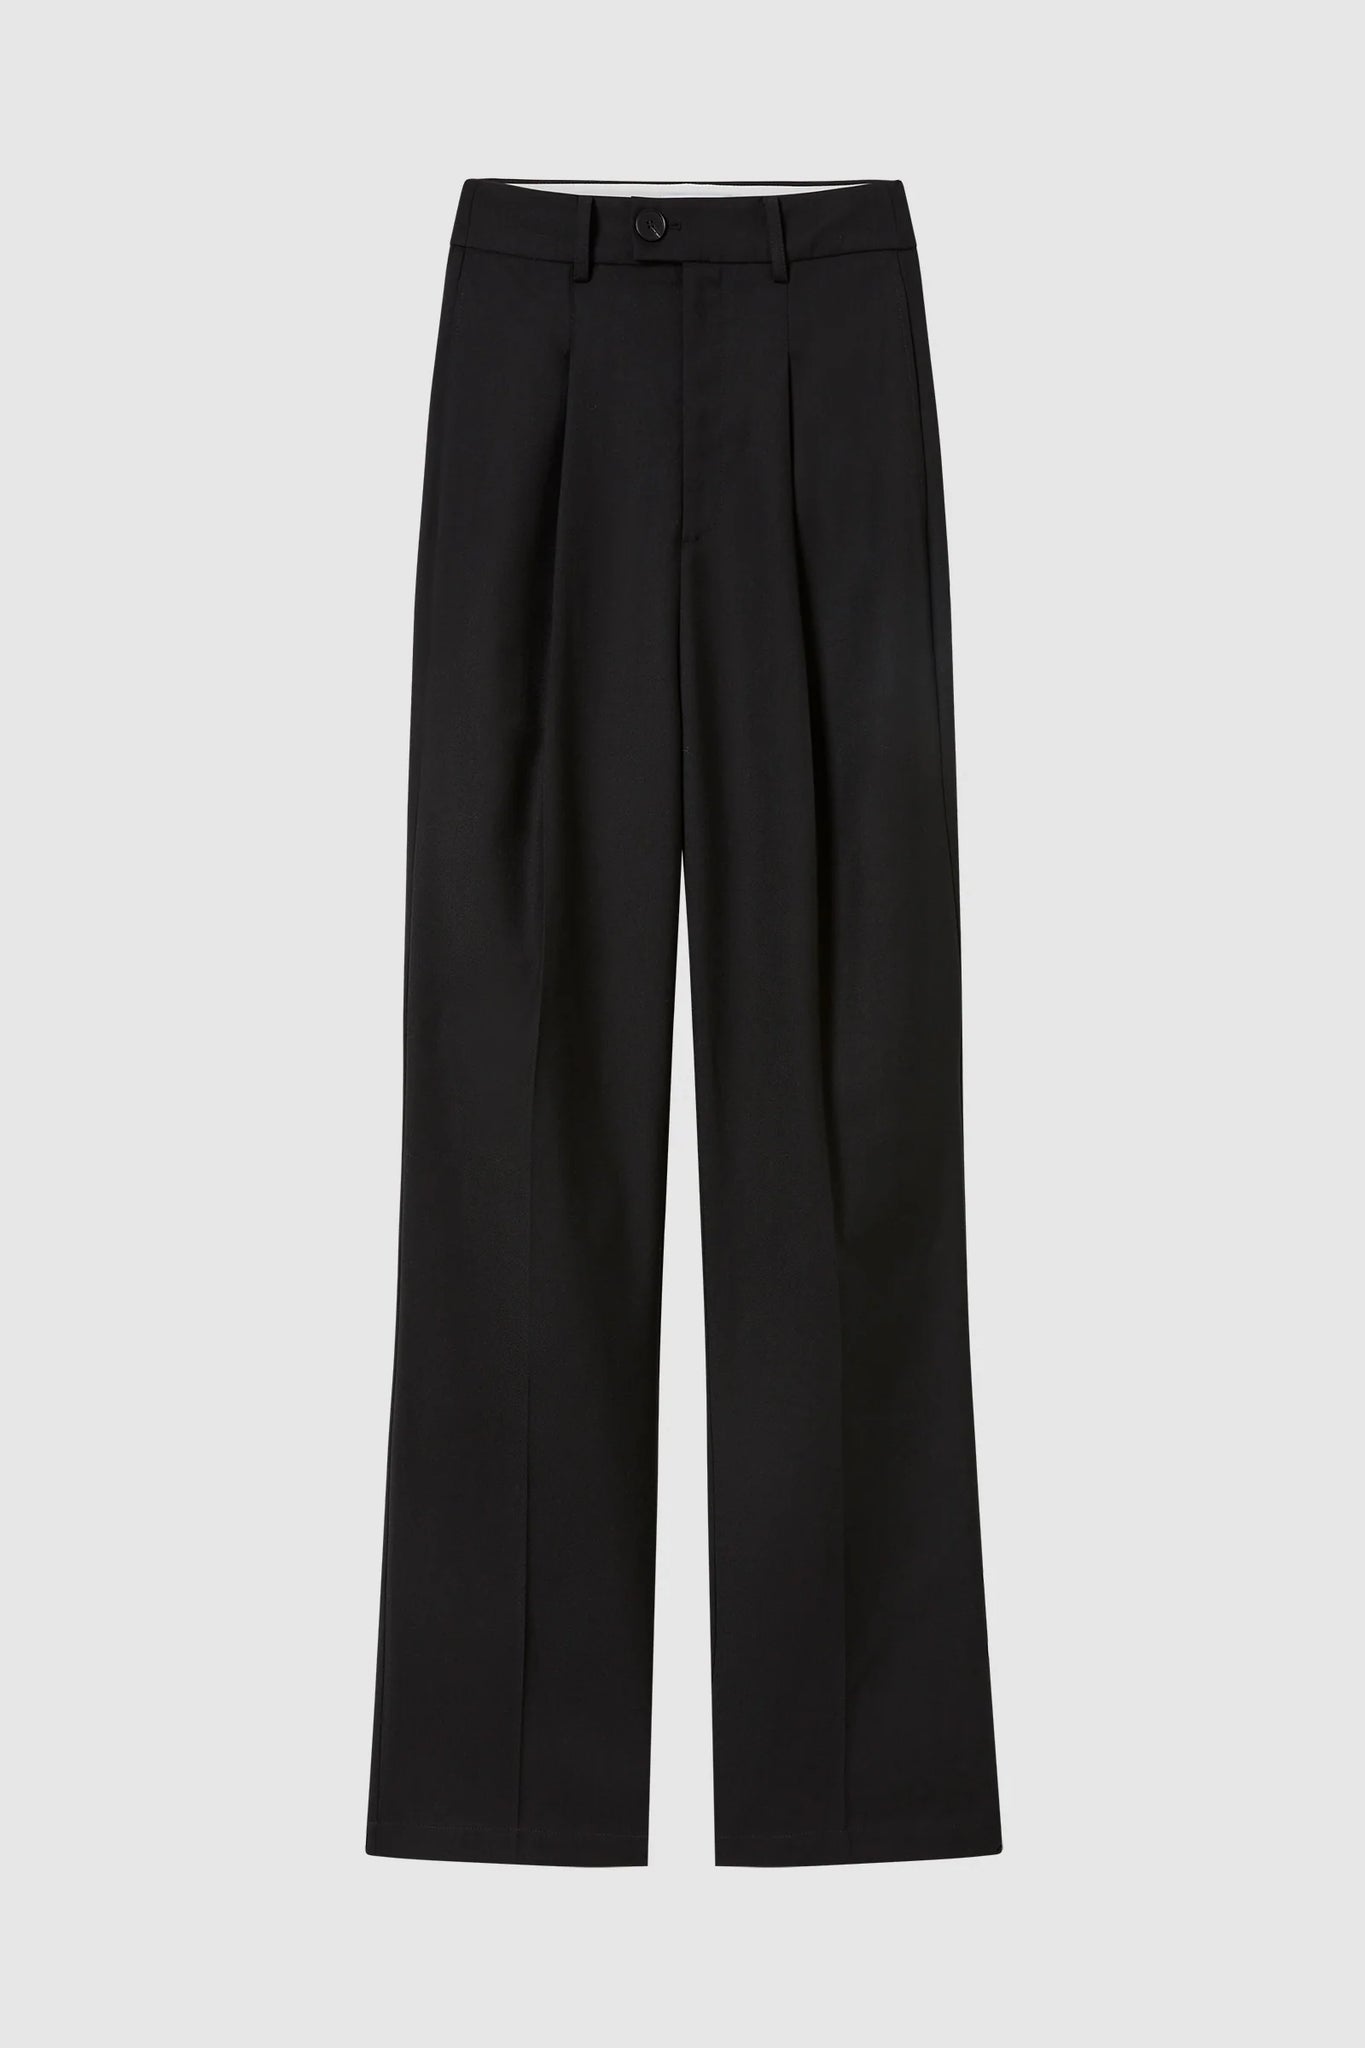 Friend of Audrey Banks Tailored Trousers - Black